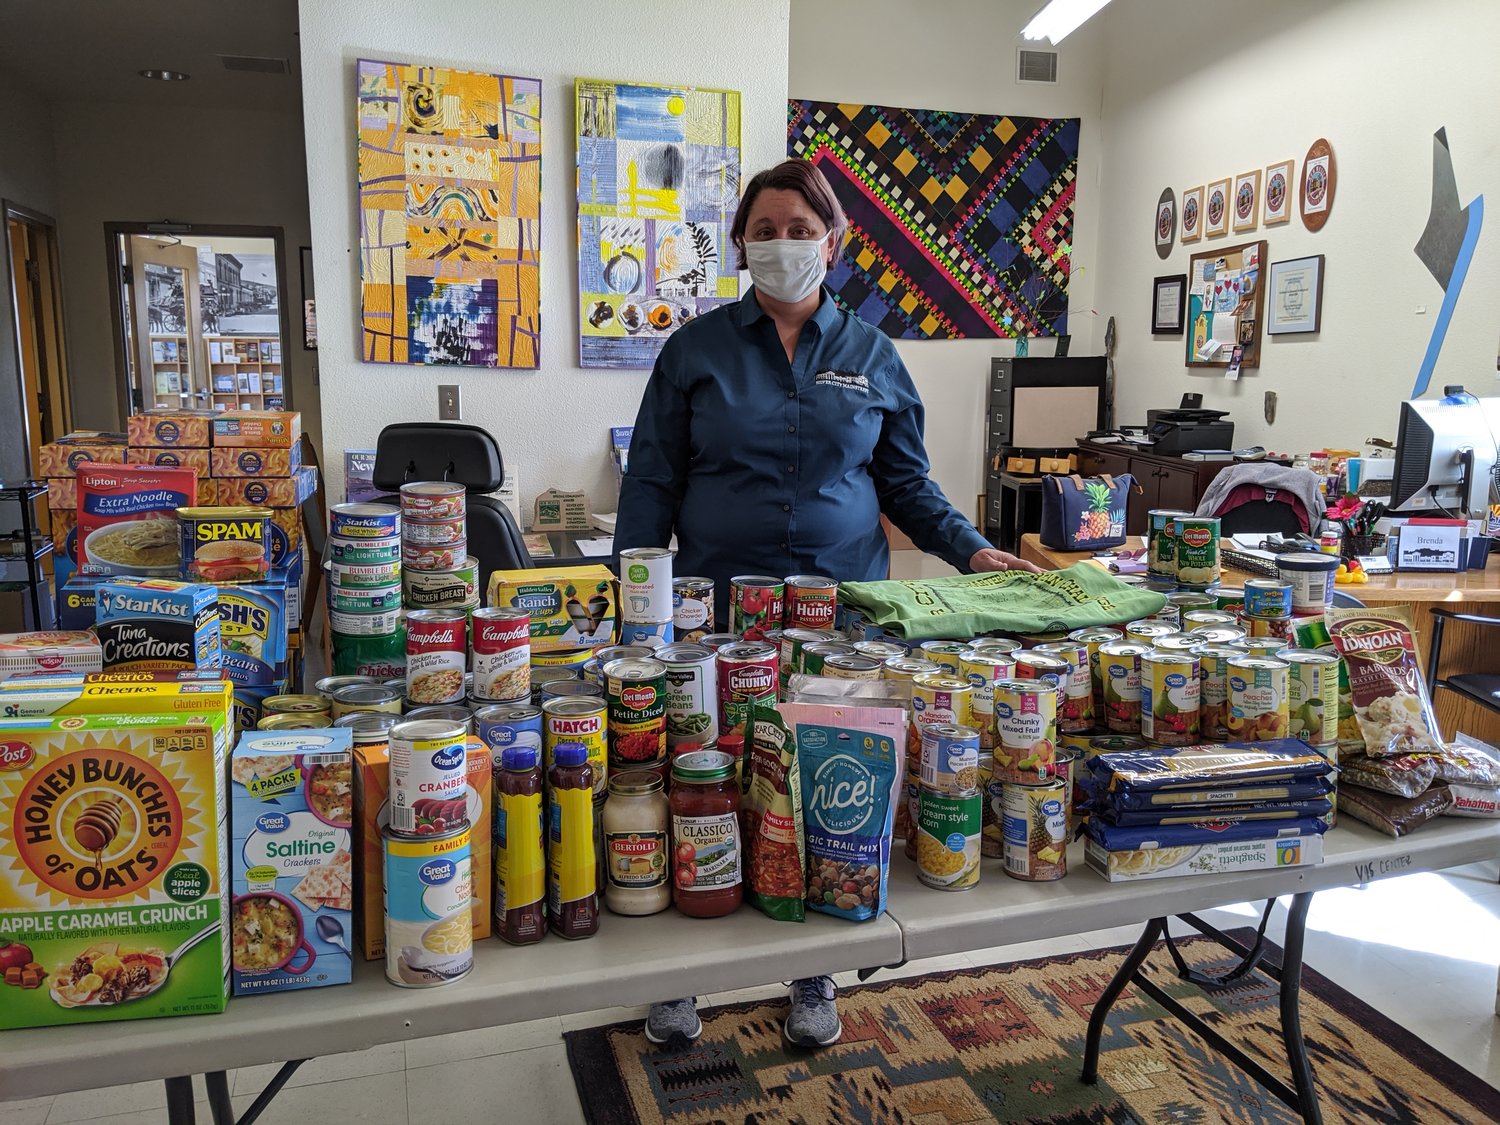 Brenda Tozier who organized the virtual fun run with the donated food. The food was shared between the Grant County Food Pantry and WNMU Food Pantry.